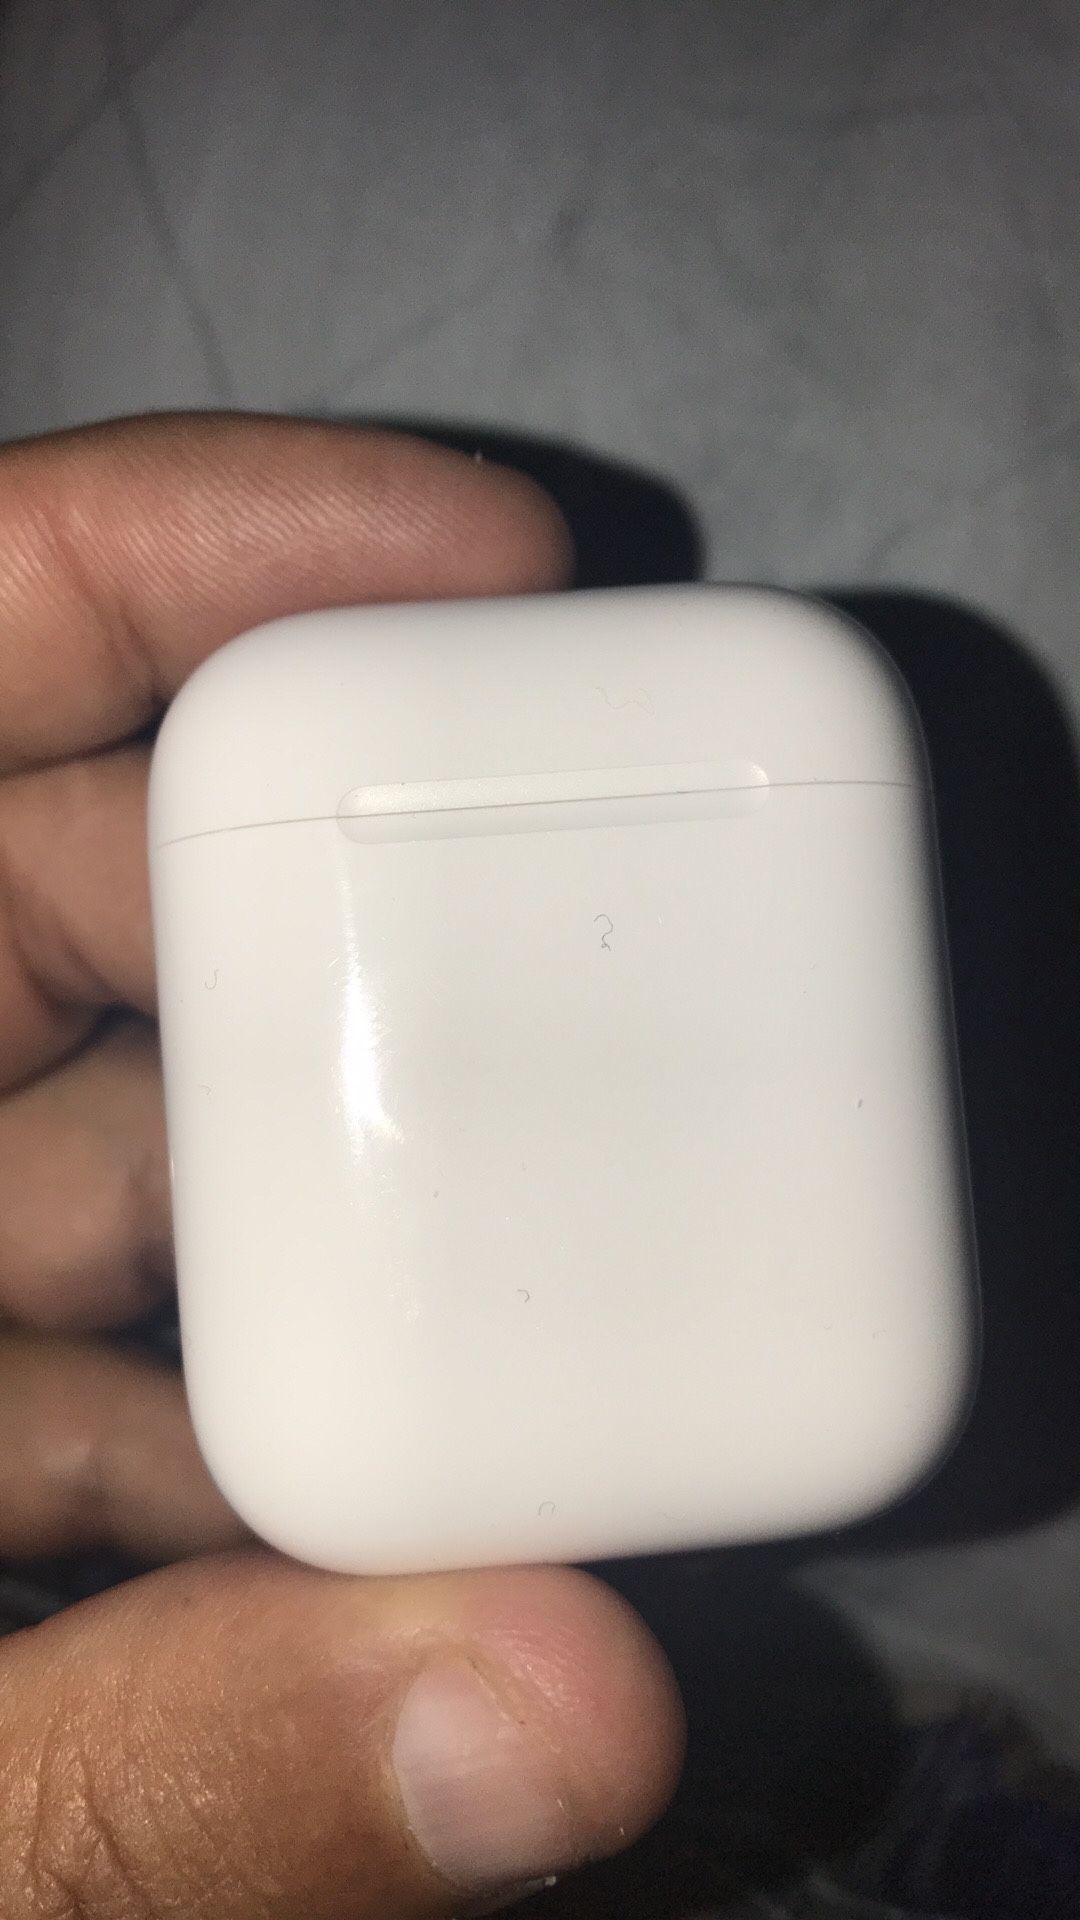 Genuine Apple 2nd generation AirPods charger case in excellent condition.